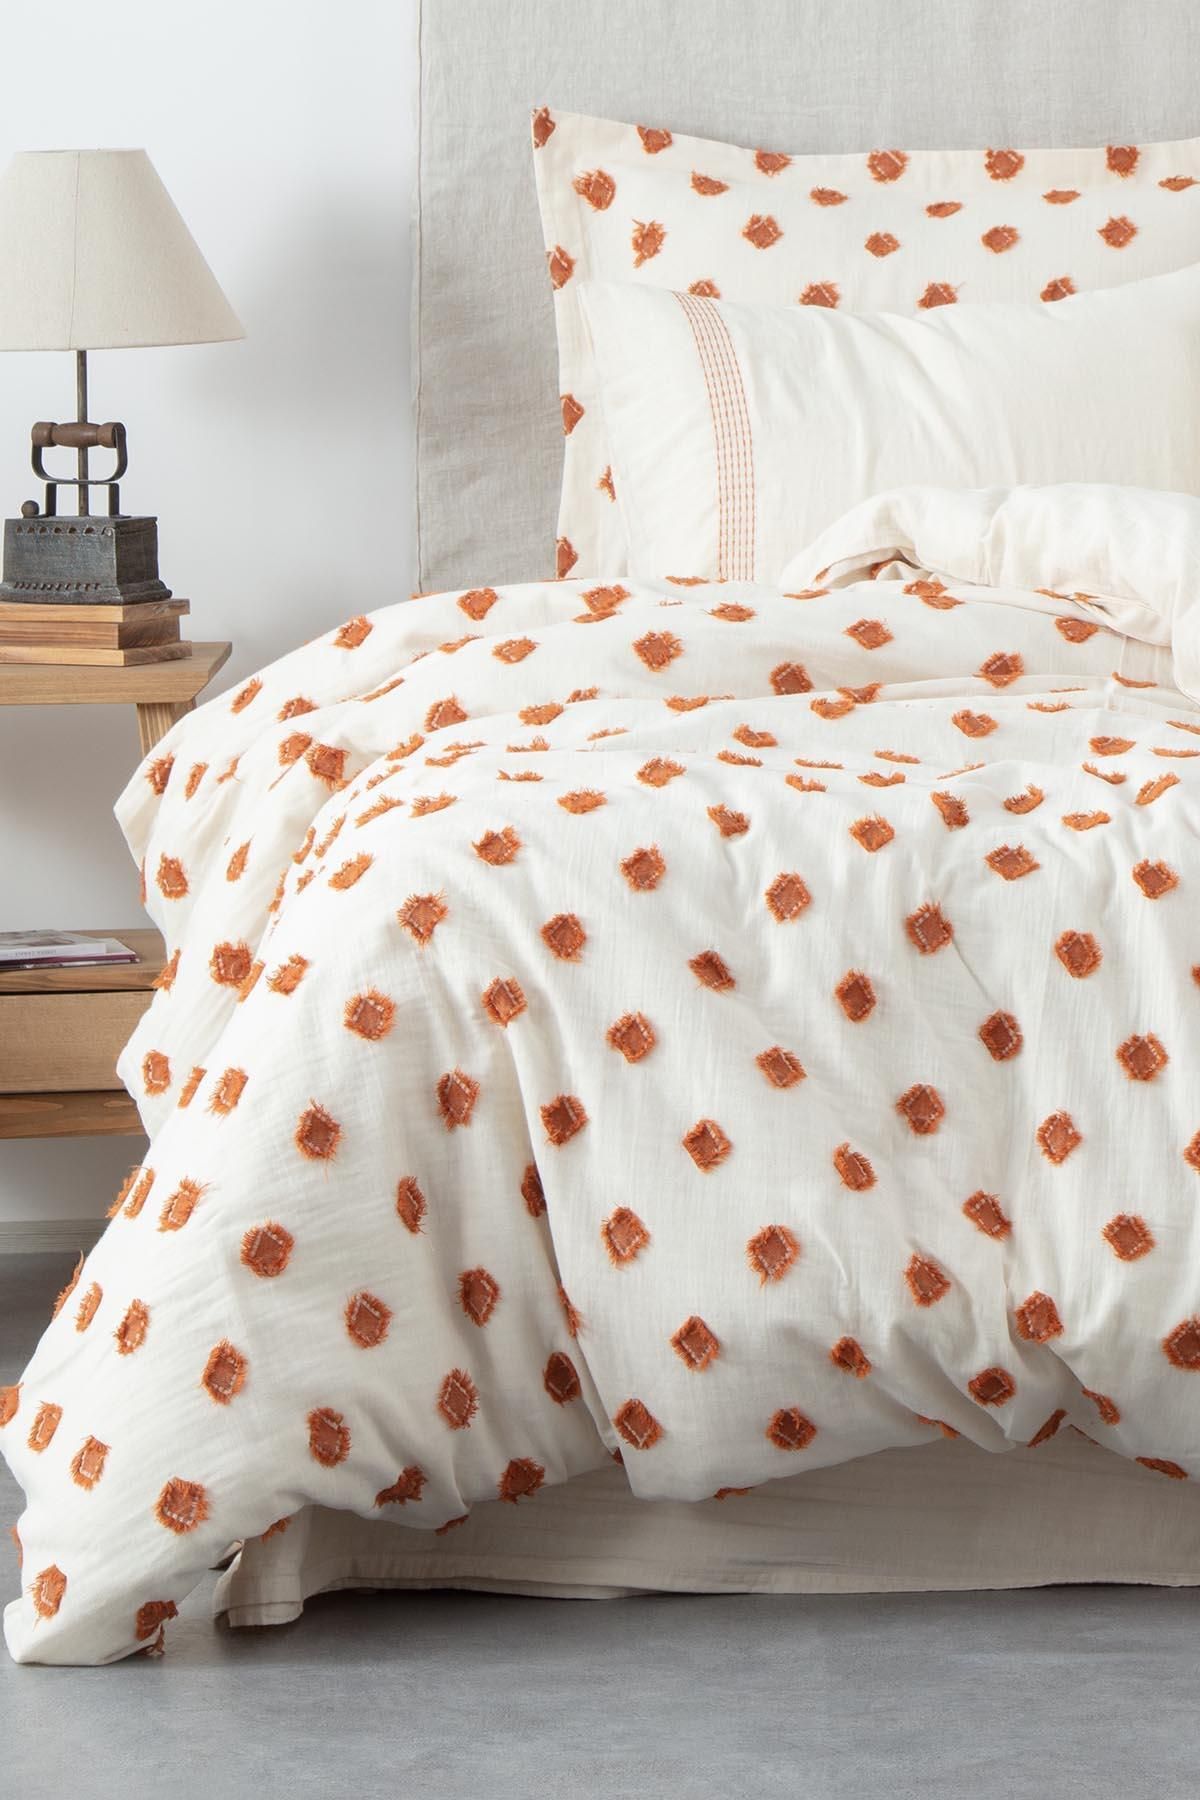 Duvet Covers, Urban Outfitters